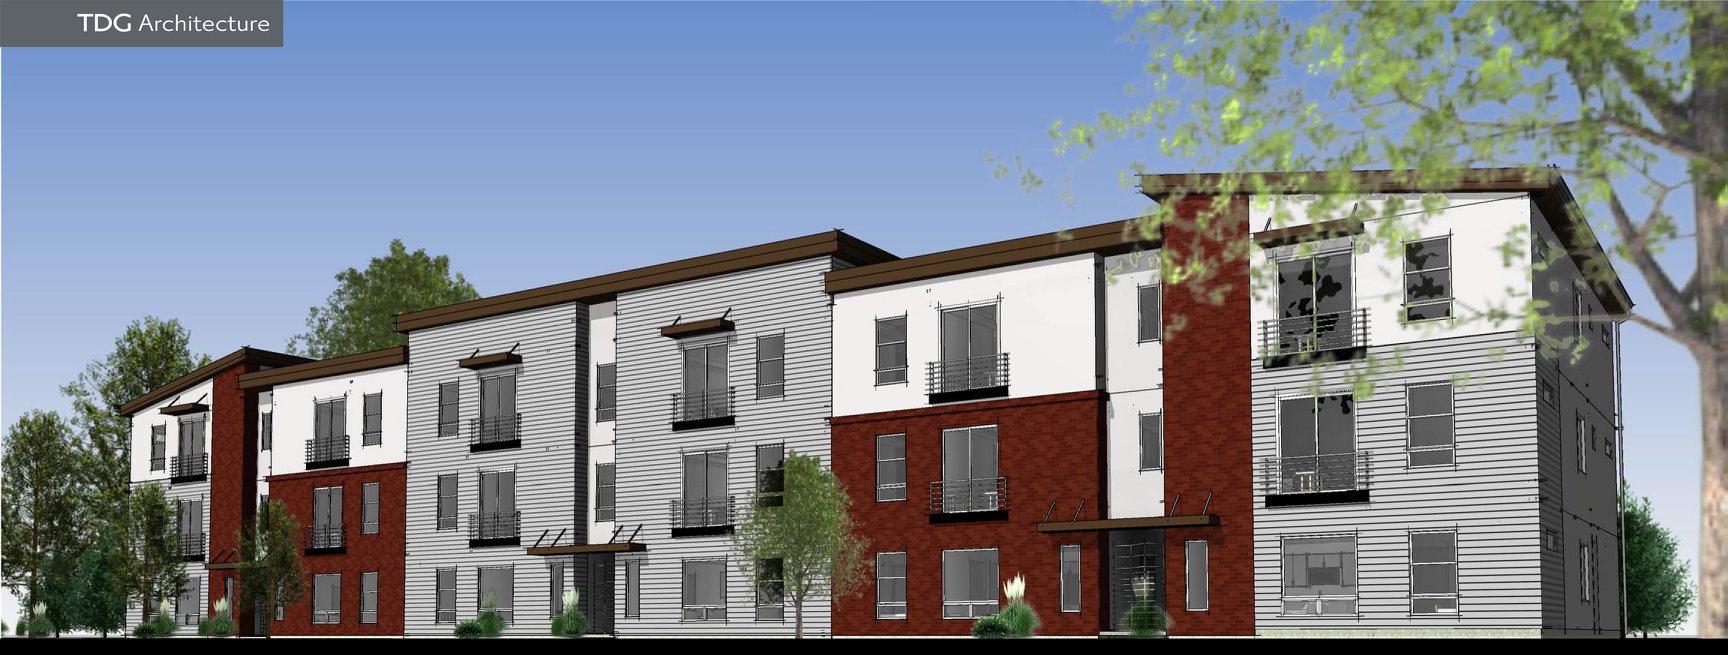 Lowell Weber Apartments presenting 810 S. Weber St.